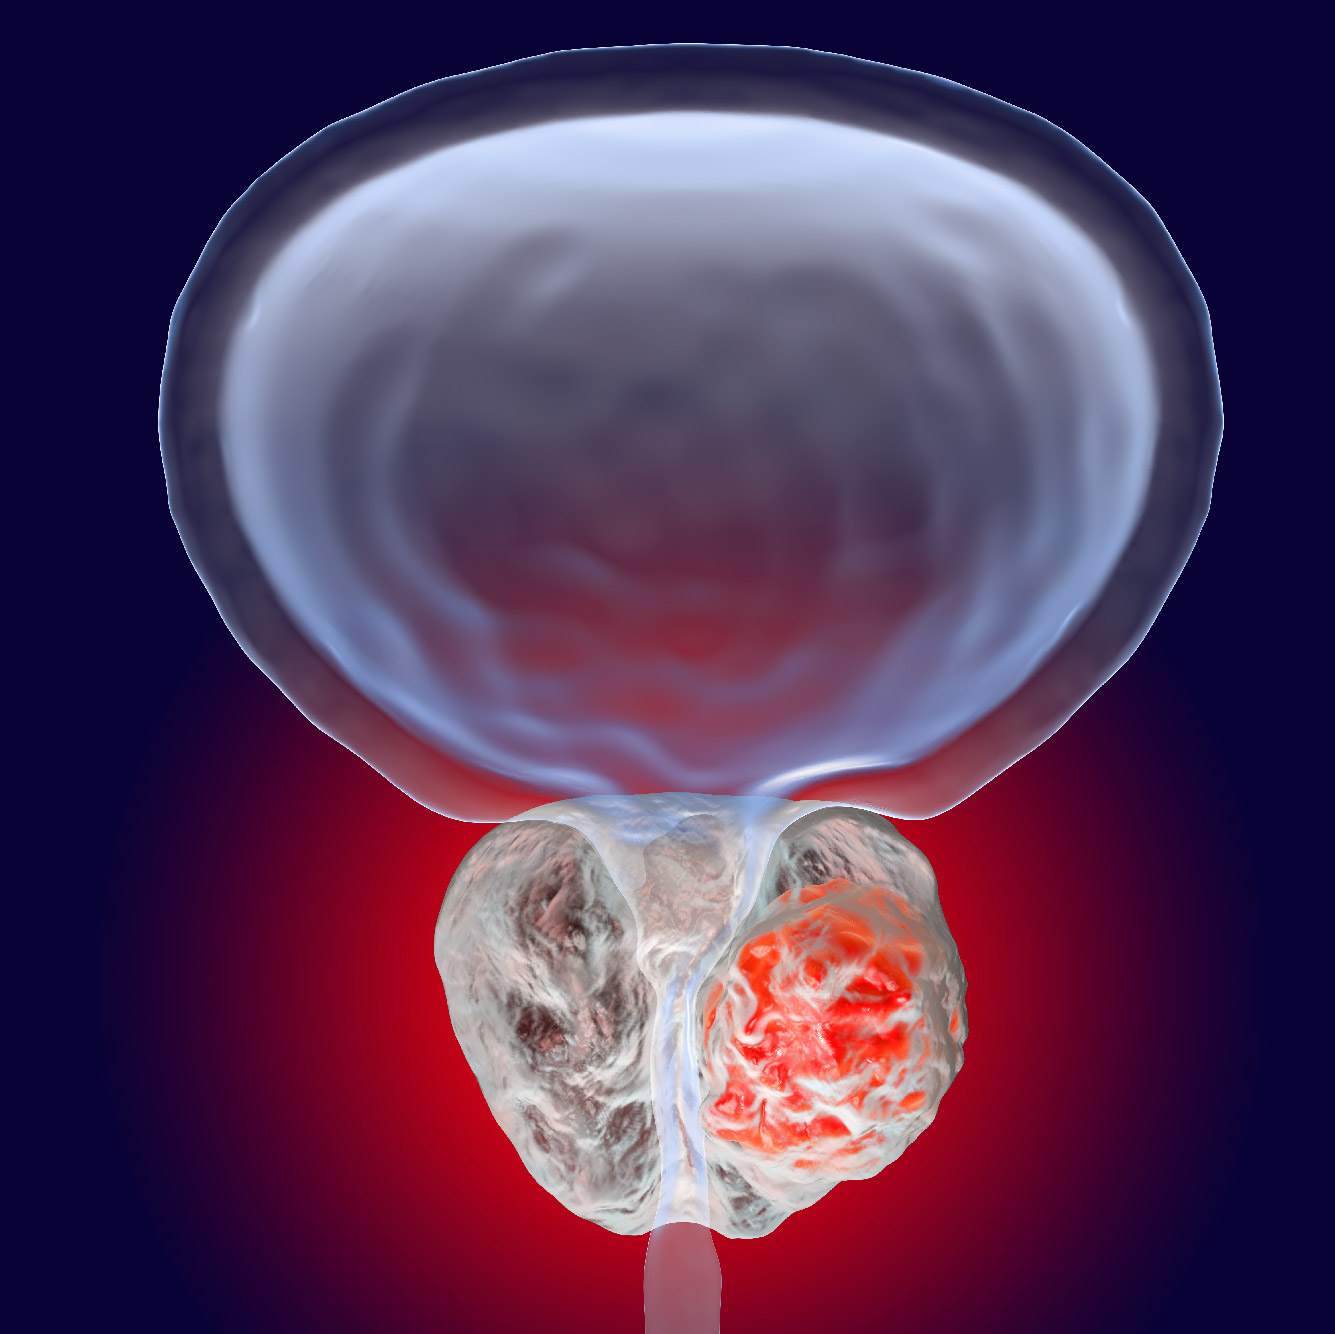 A prostate infected with cancer